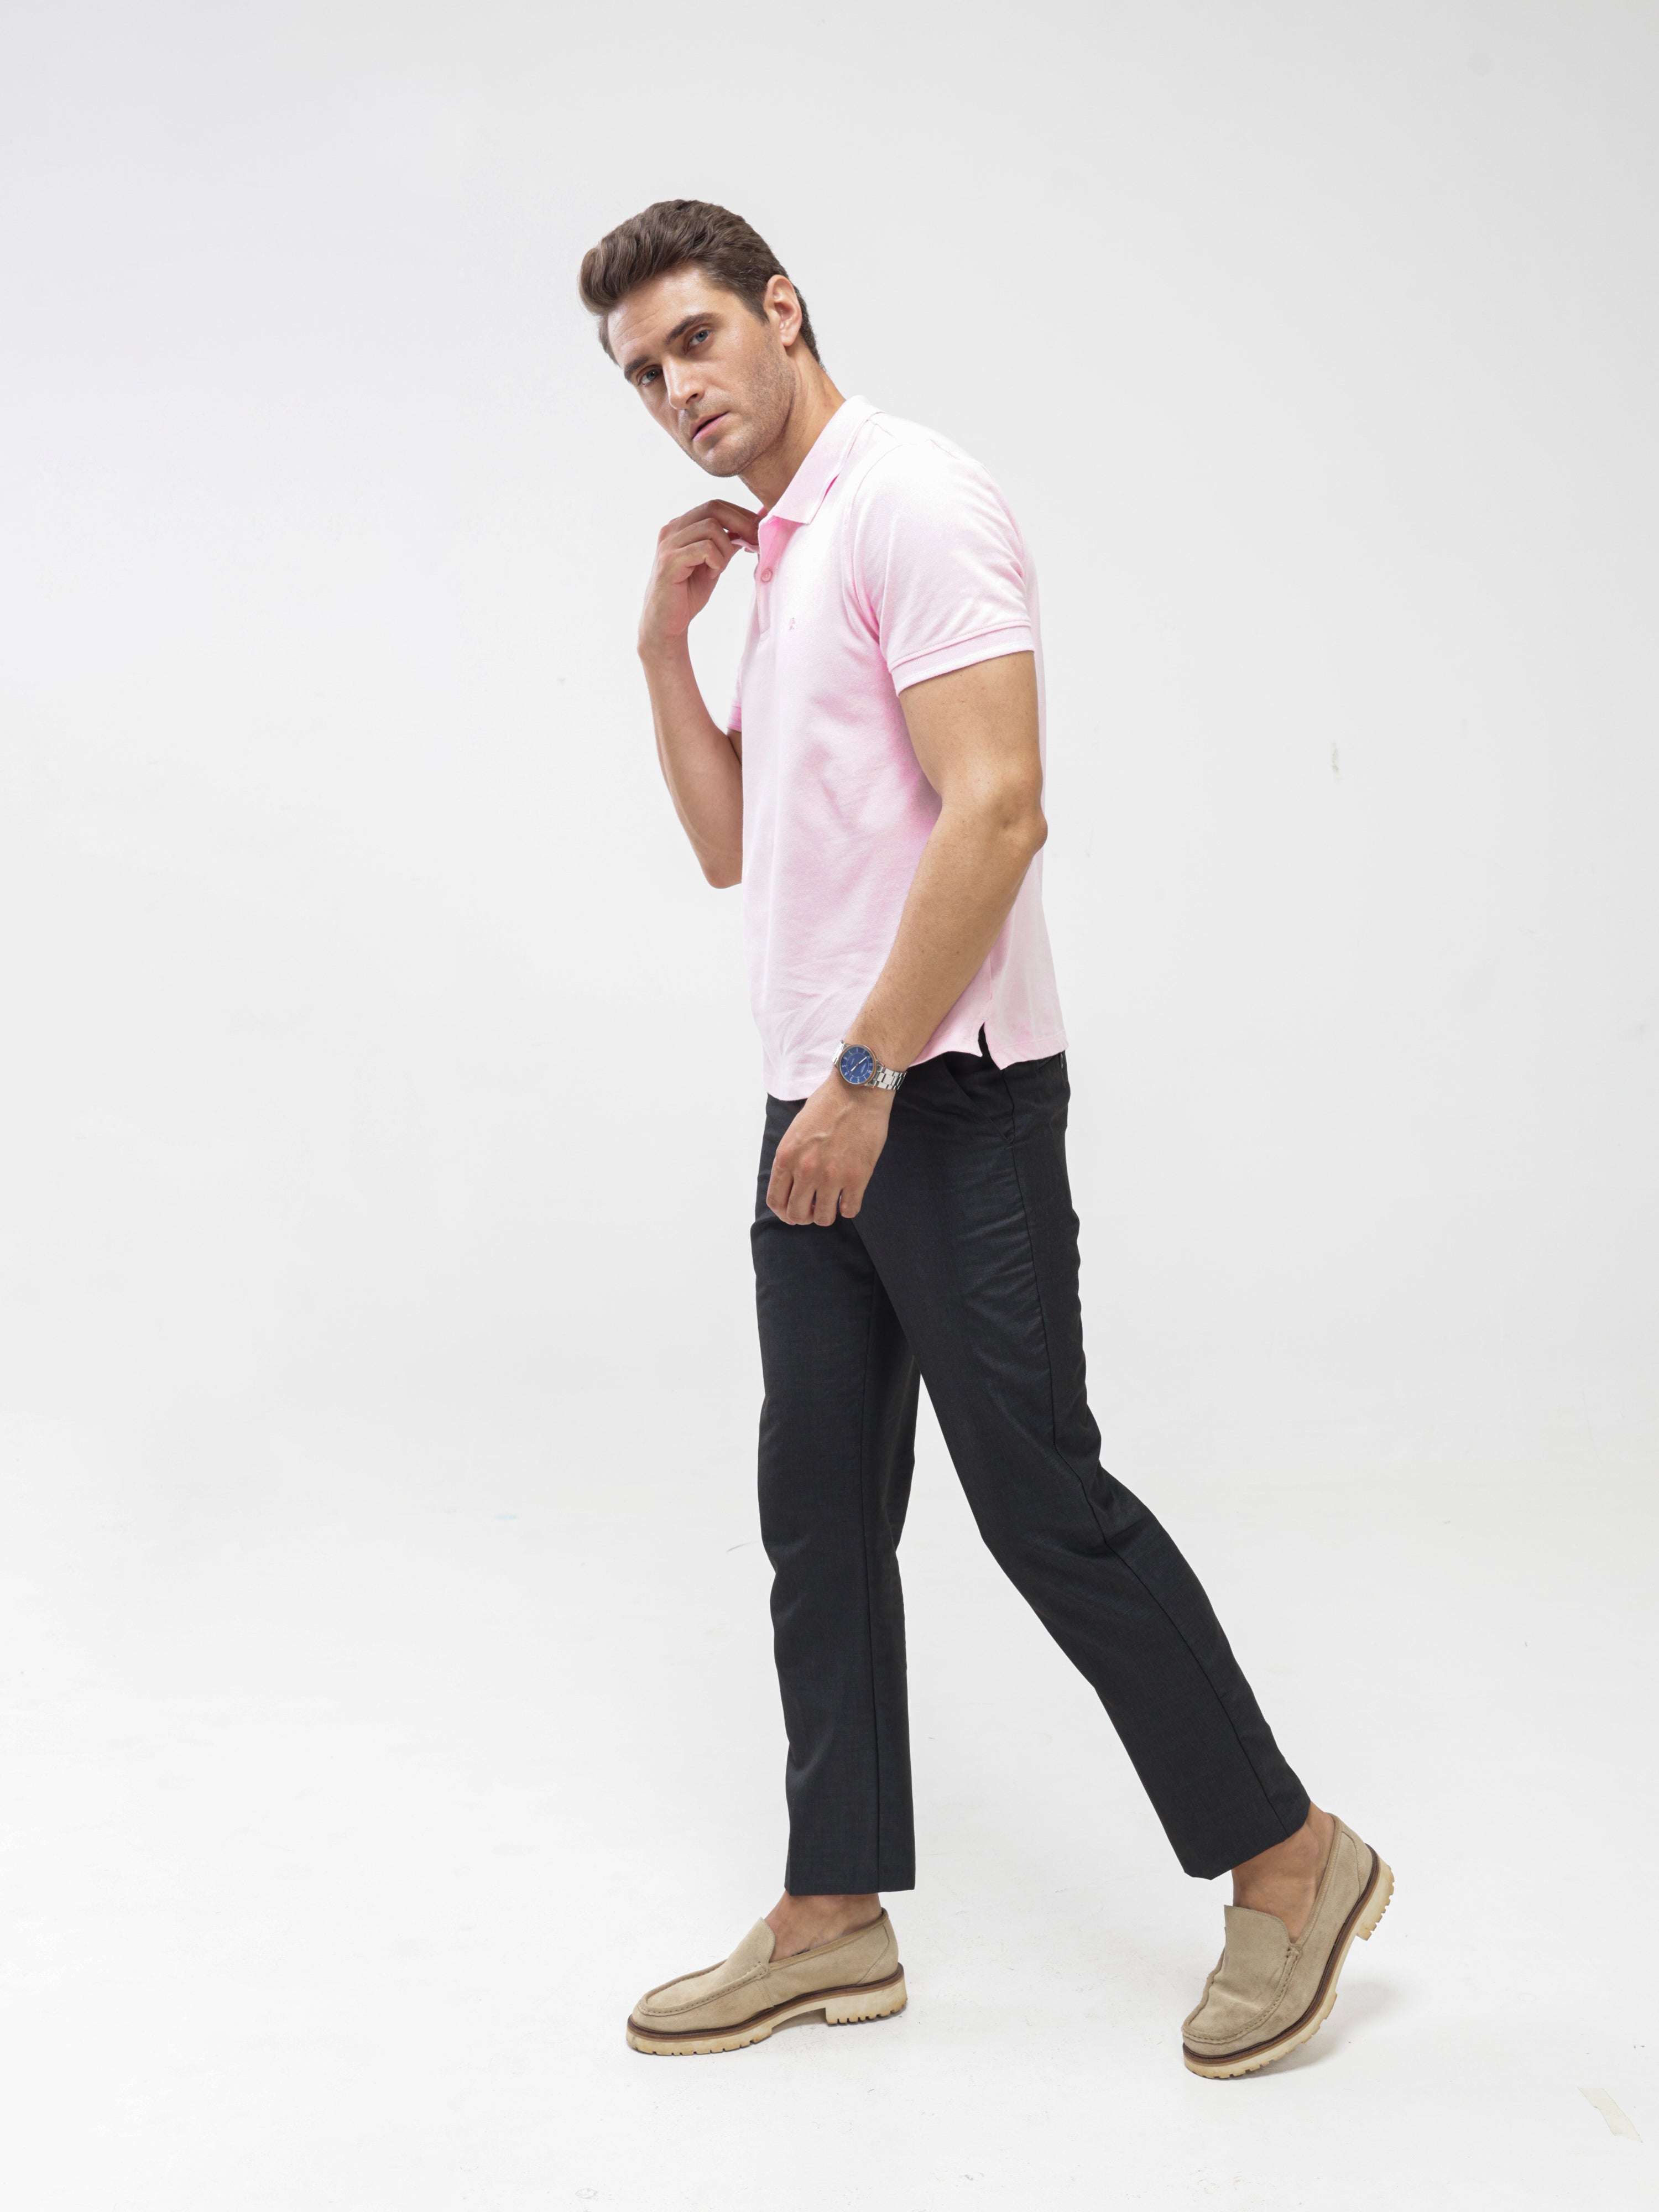 Man wearing a light pink Turms Polo T-shirt and dark pants, showcasing tailored fit and premium cotton fabric.